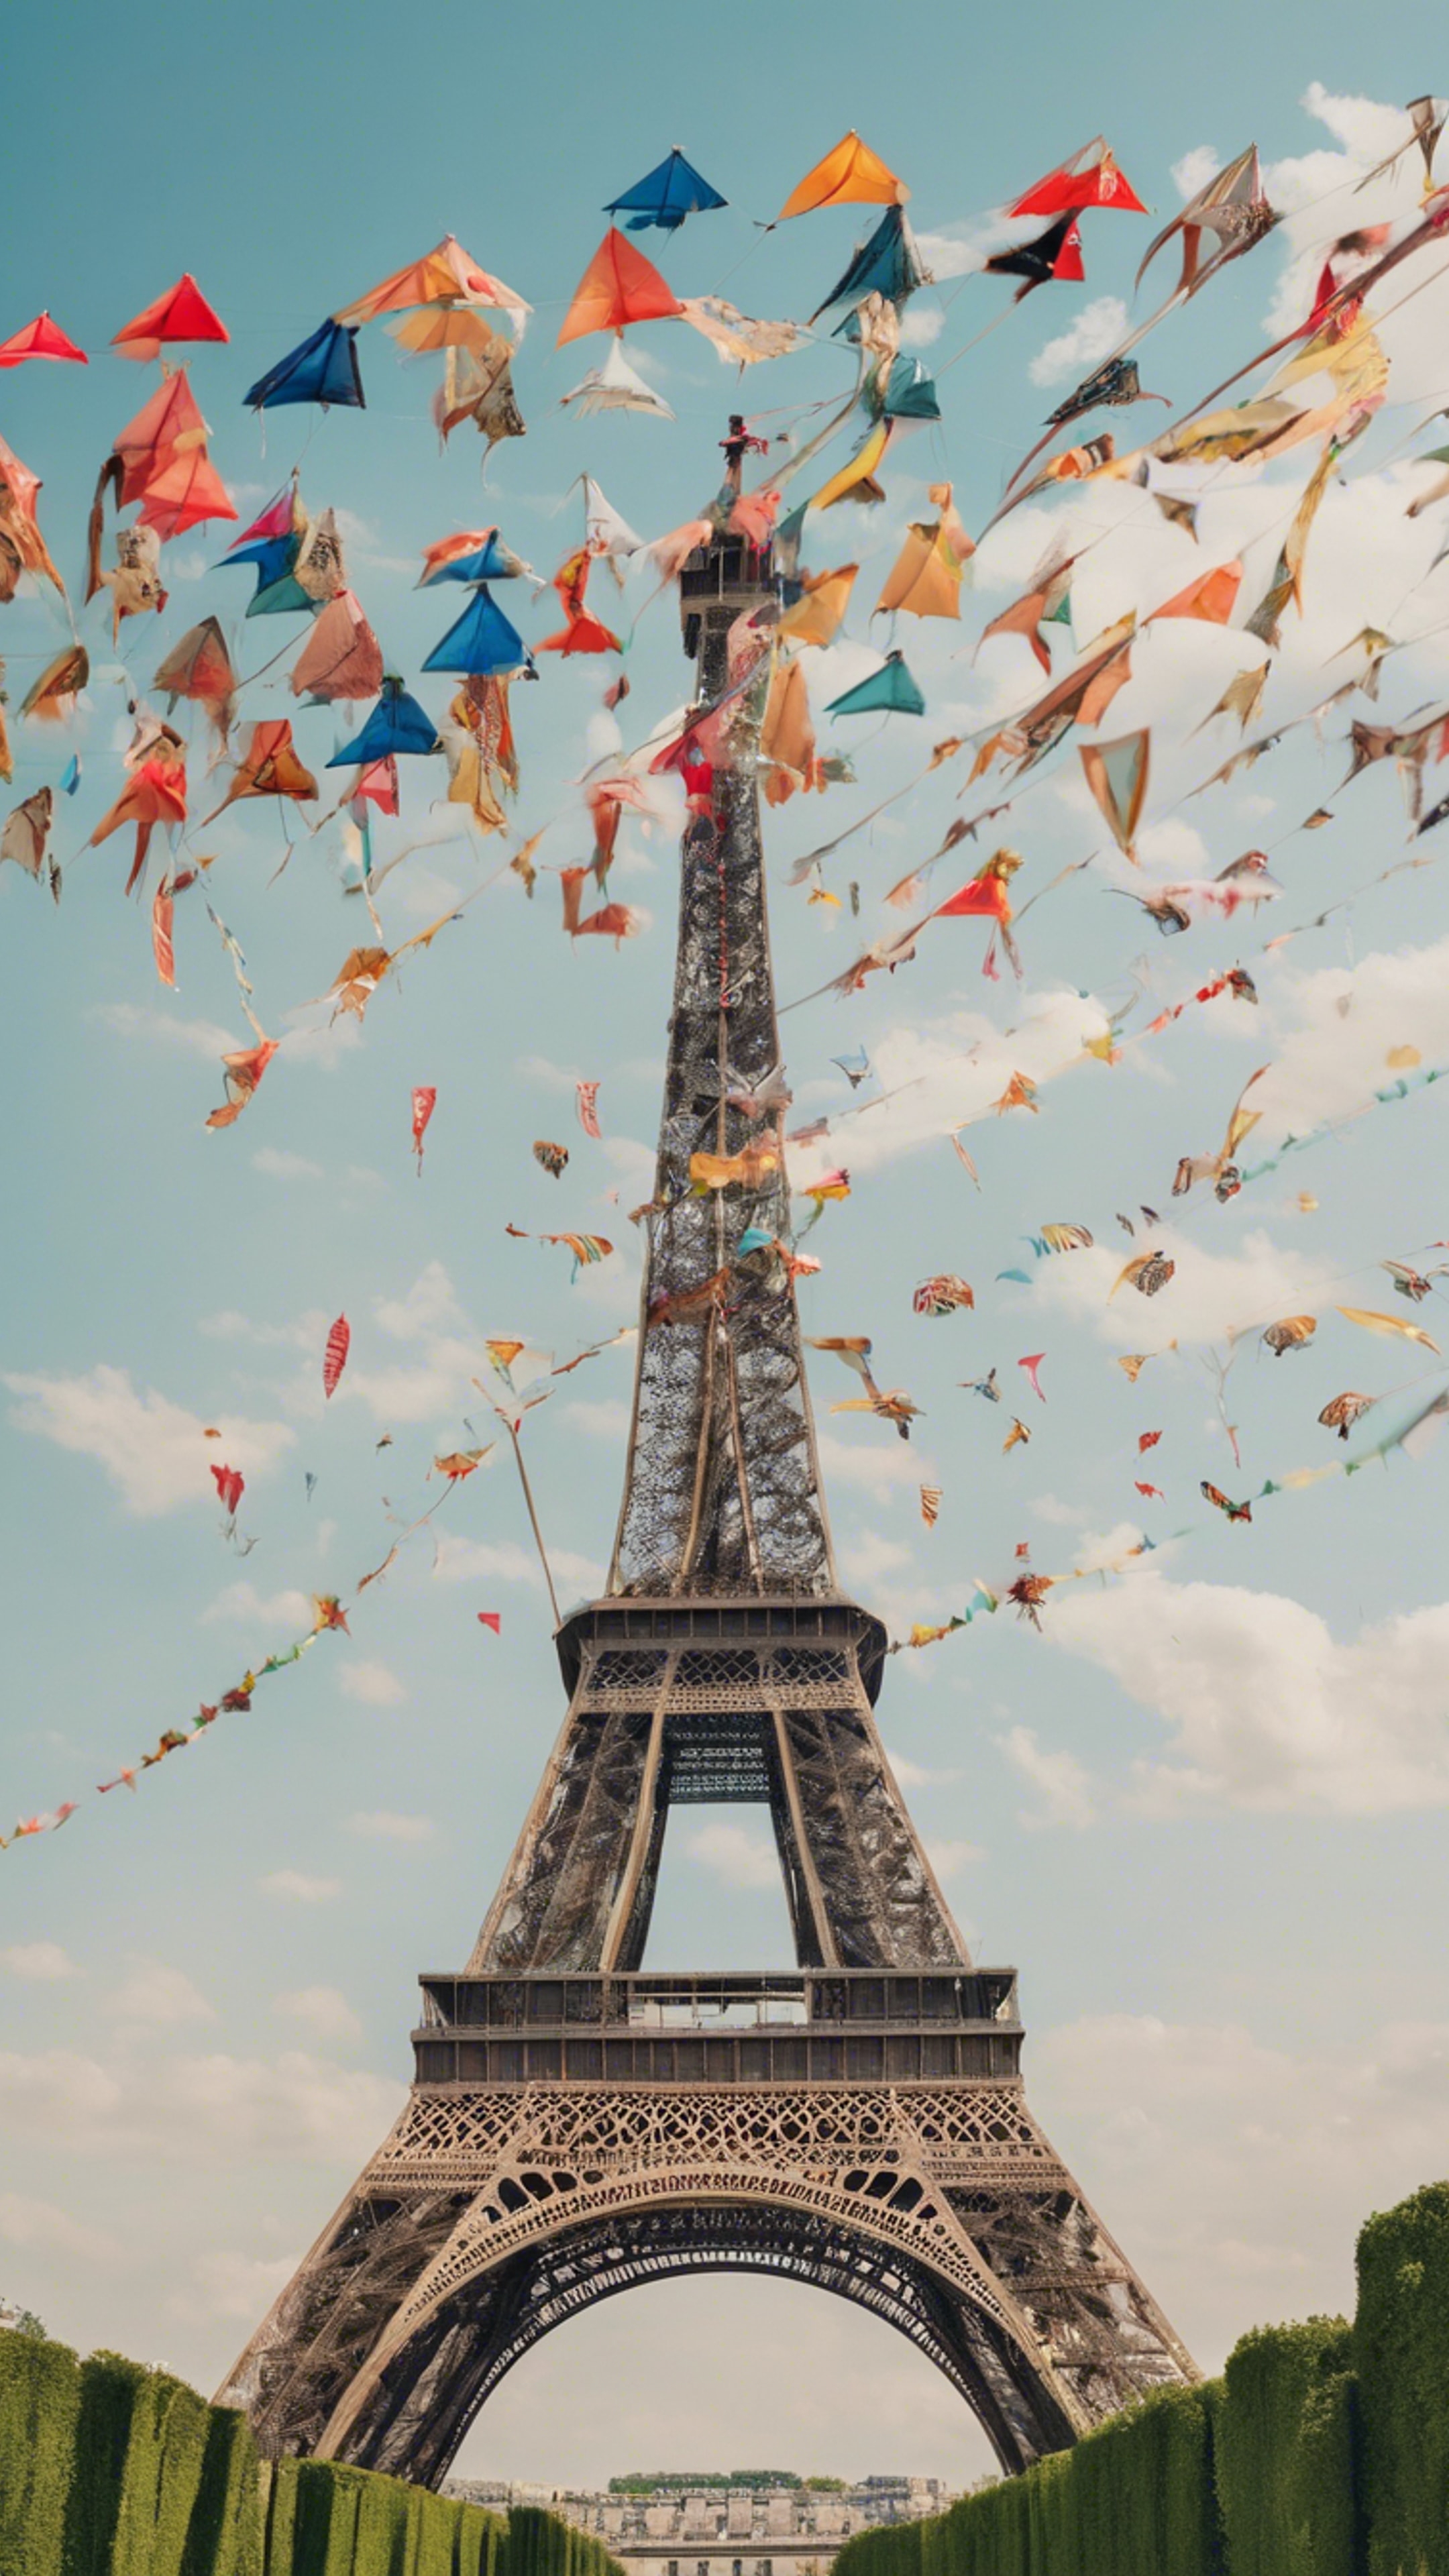 Numerous colorful kites flying around the Eiffel Tower on a breezy summer day. 墙纸[13c5a5af918a46f7995e]